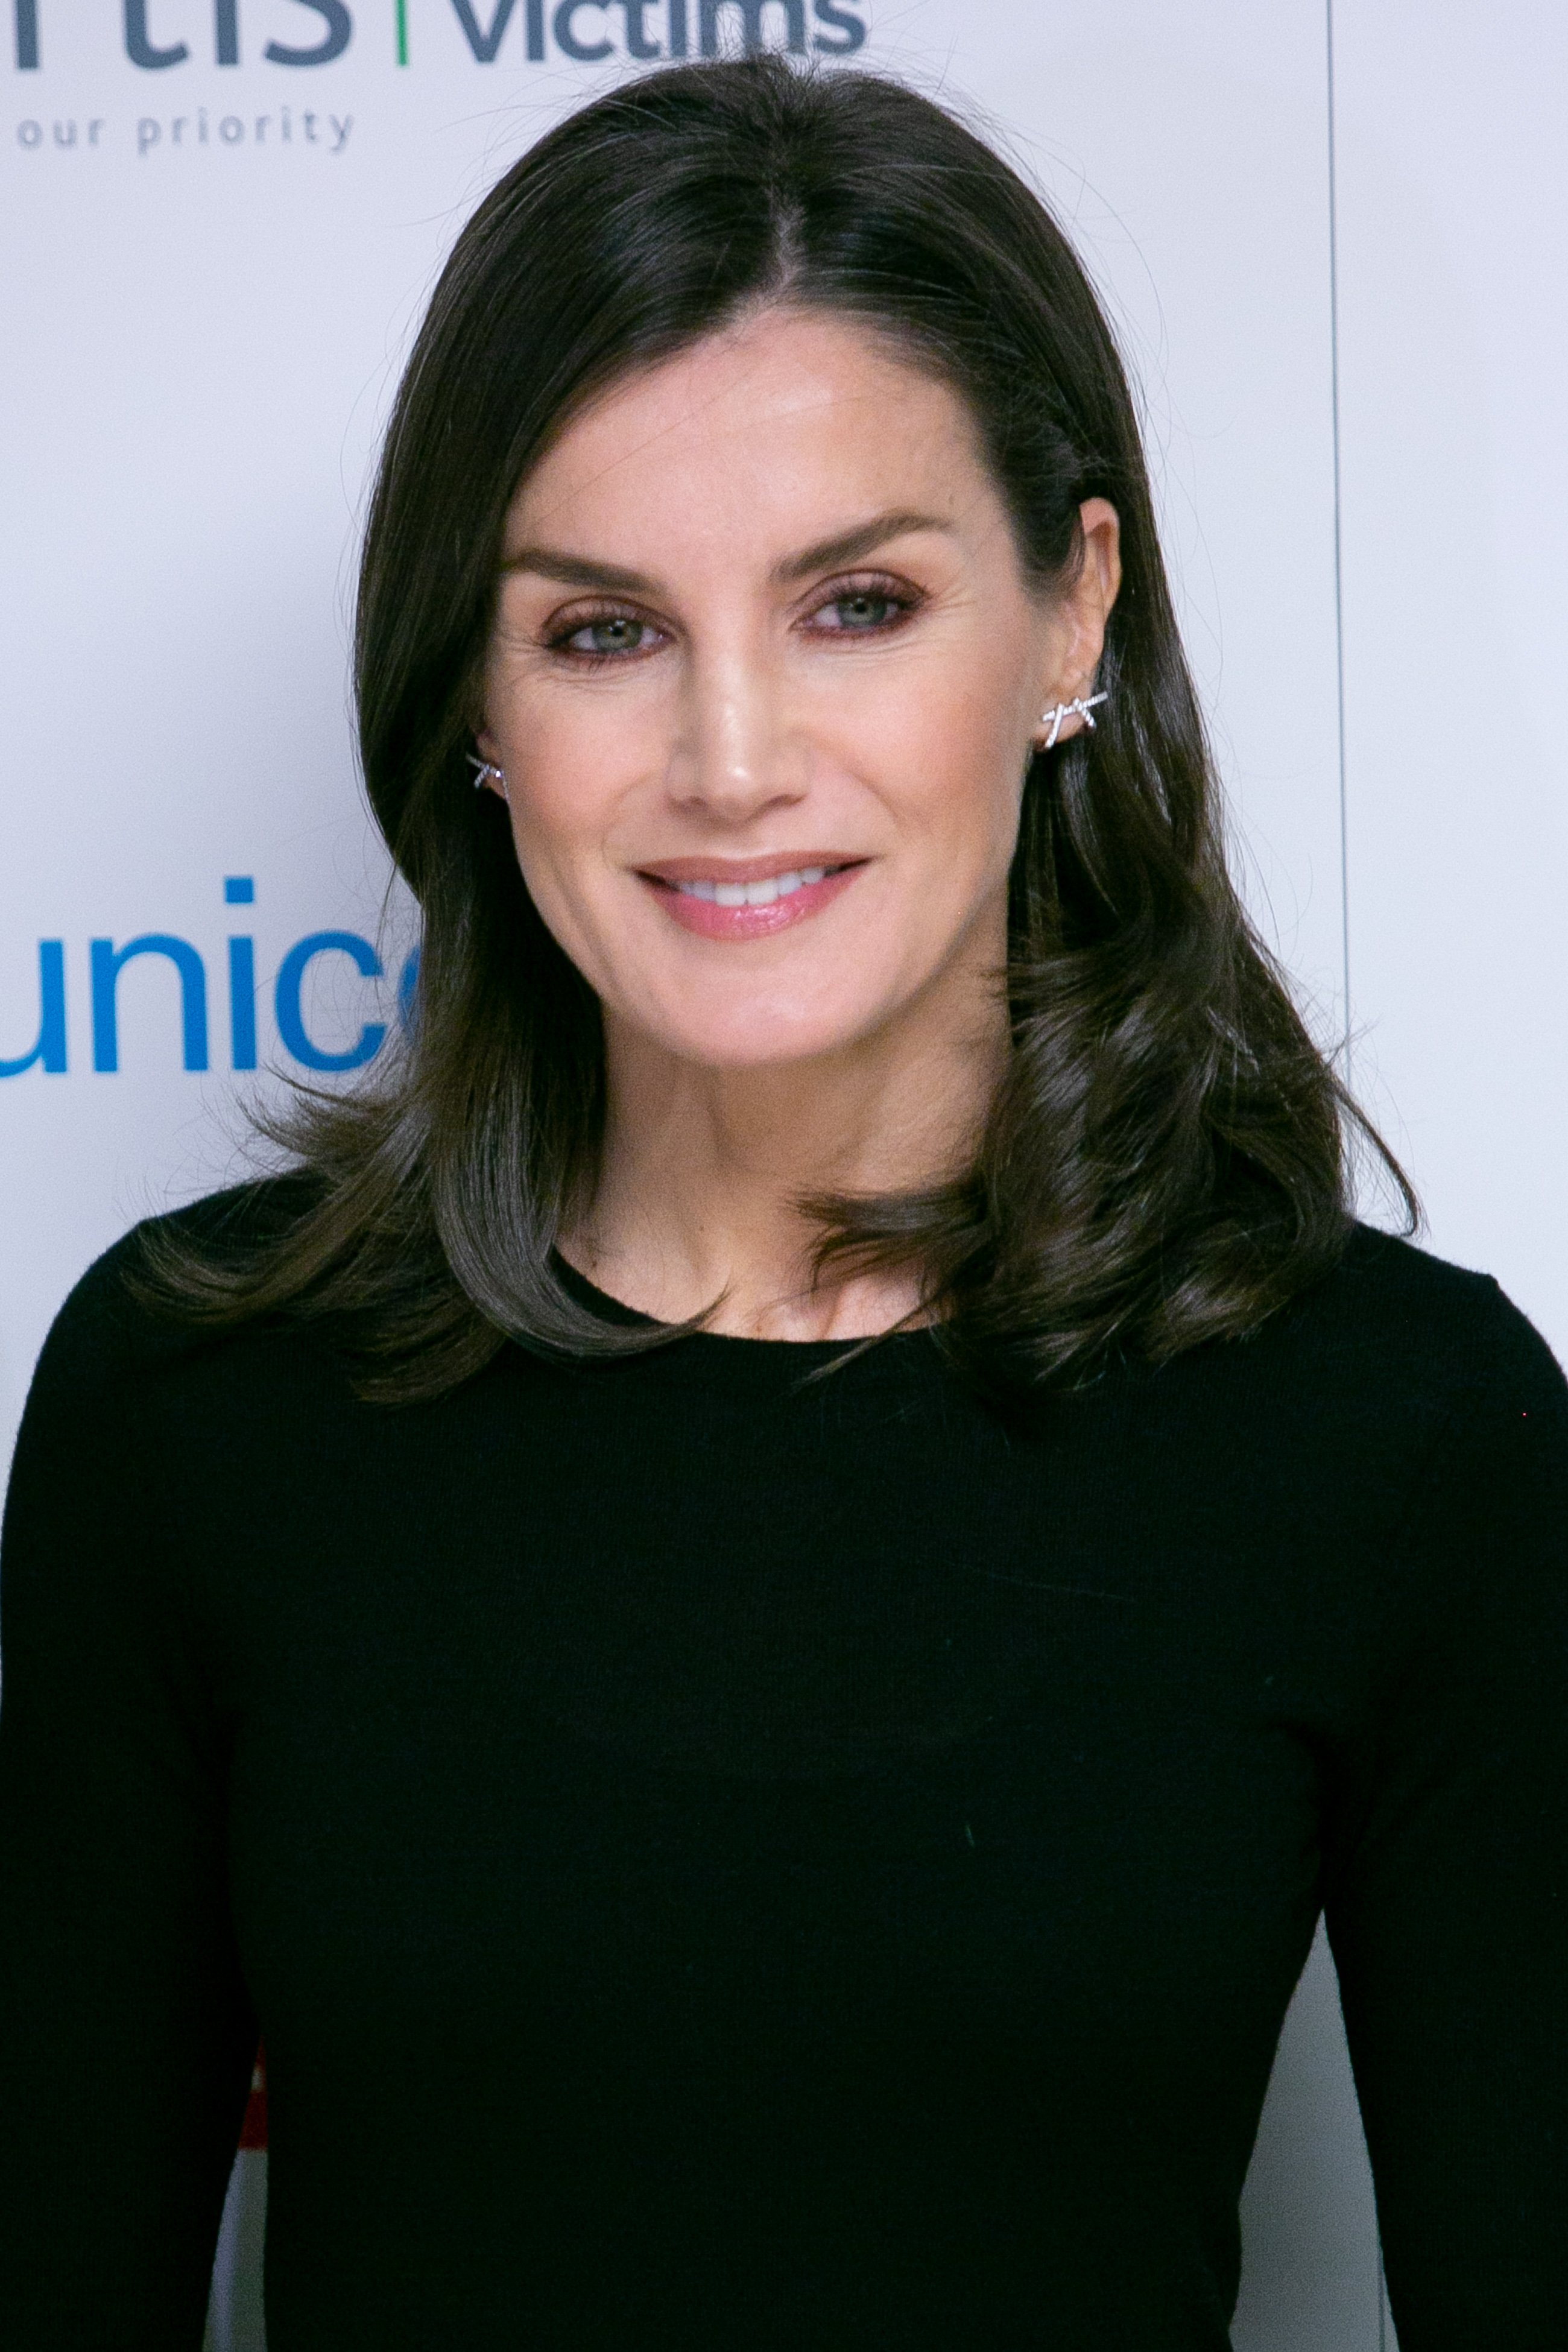 Queen Letizia of Spain attending a forum at Arbetis headquarters on December 12, 2019 in Madrid, Spain. / Source: Getty Images